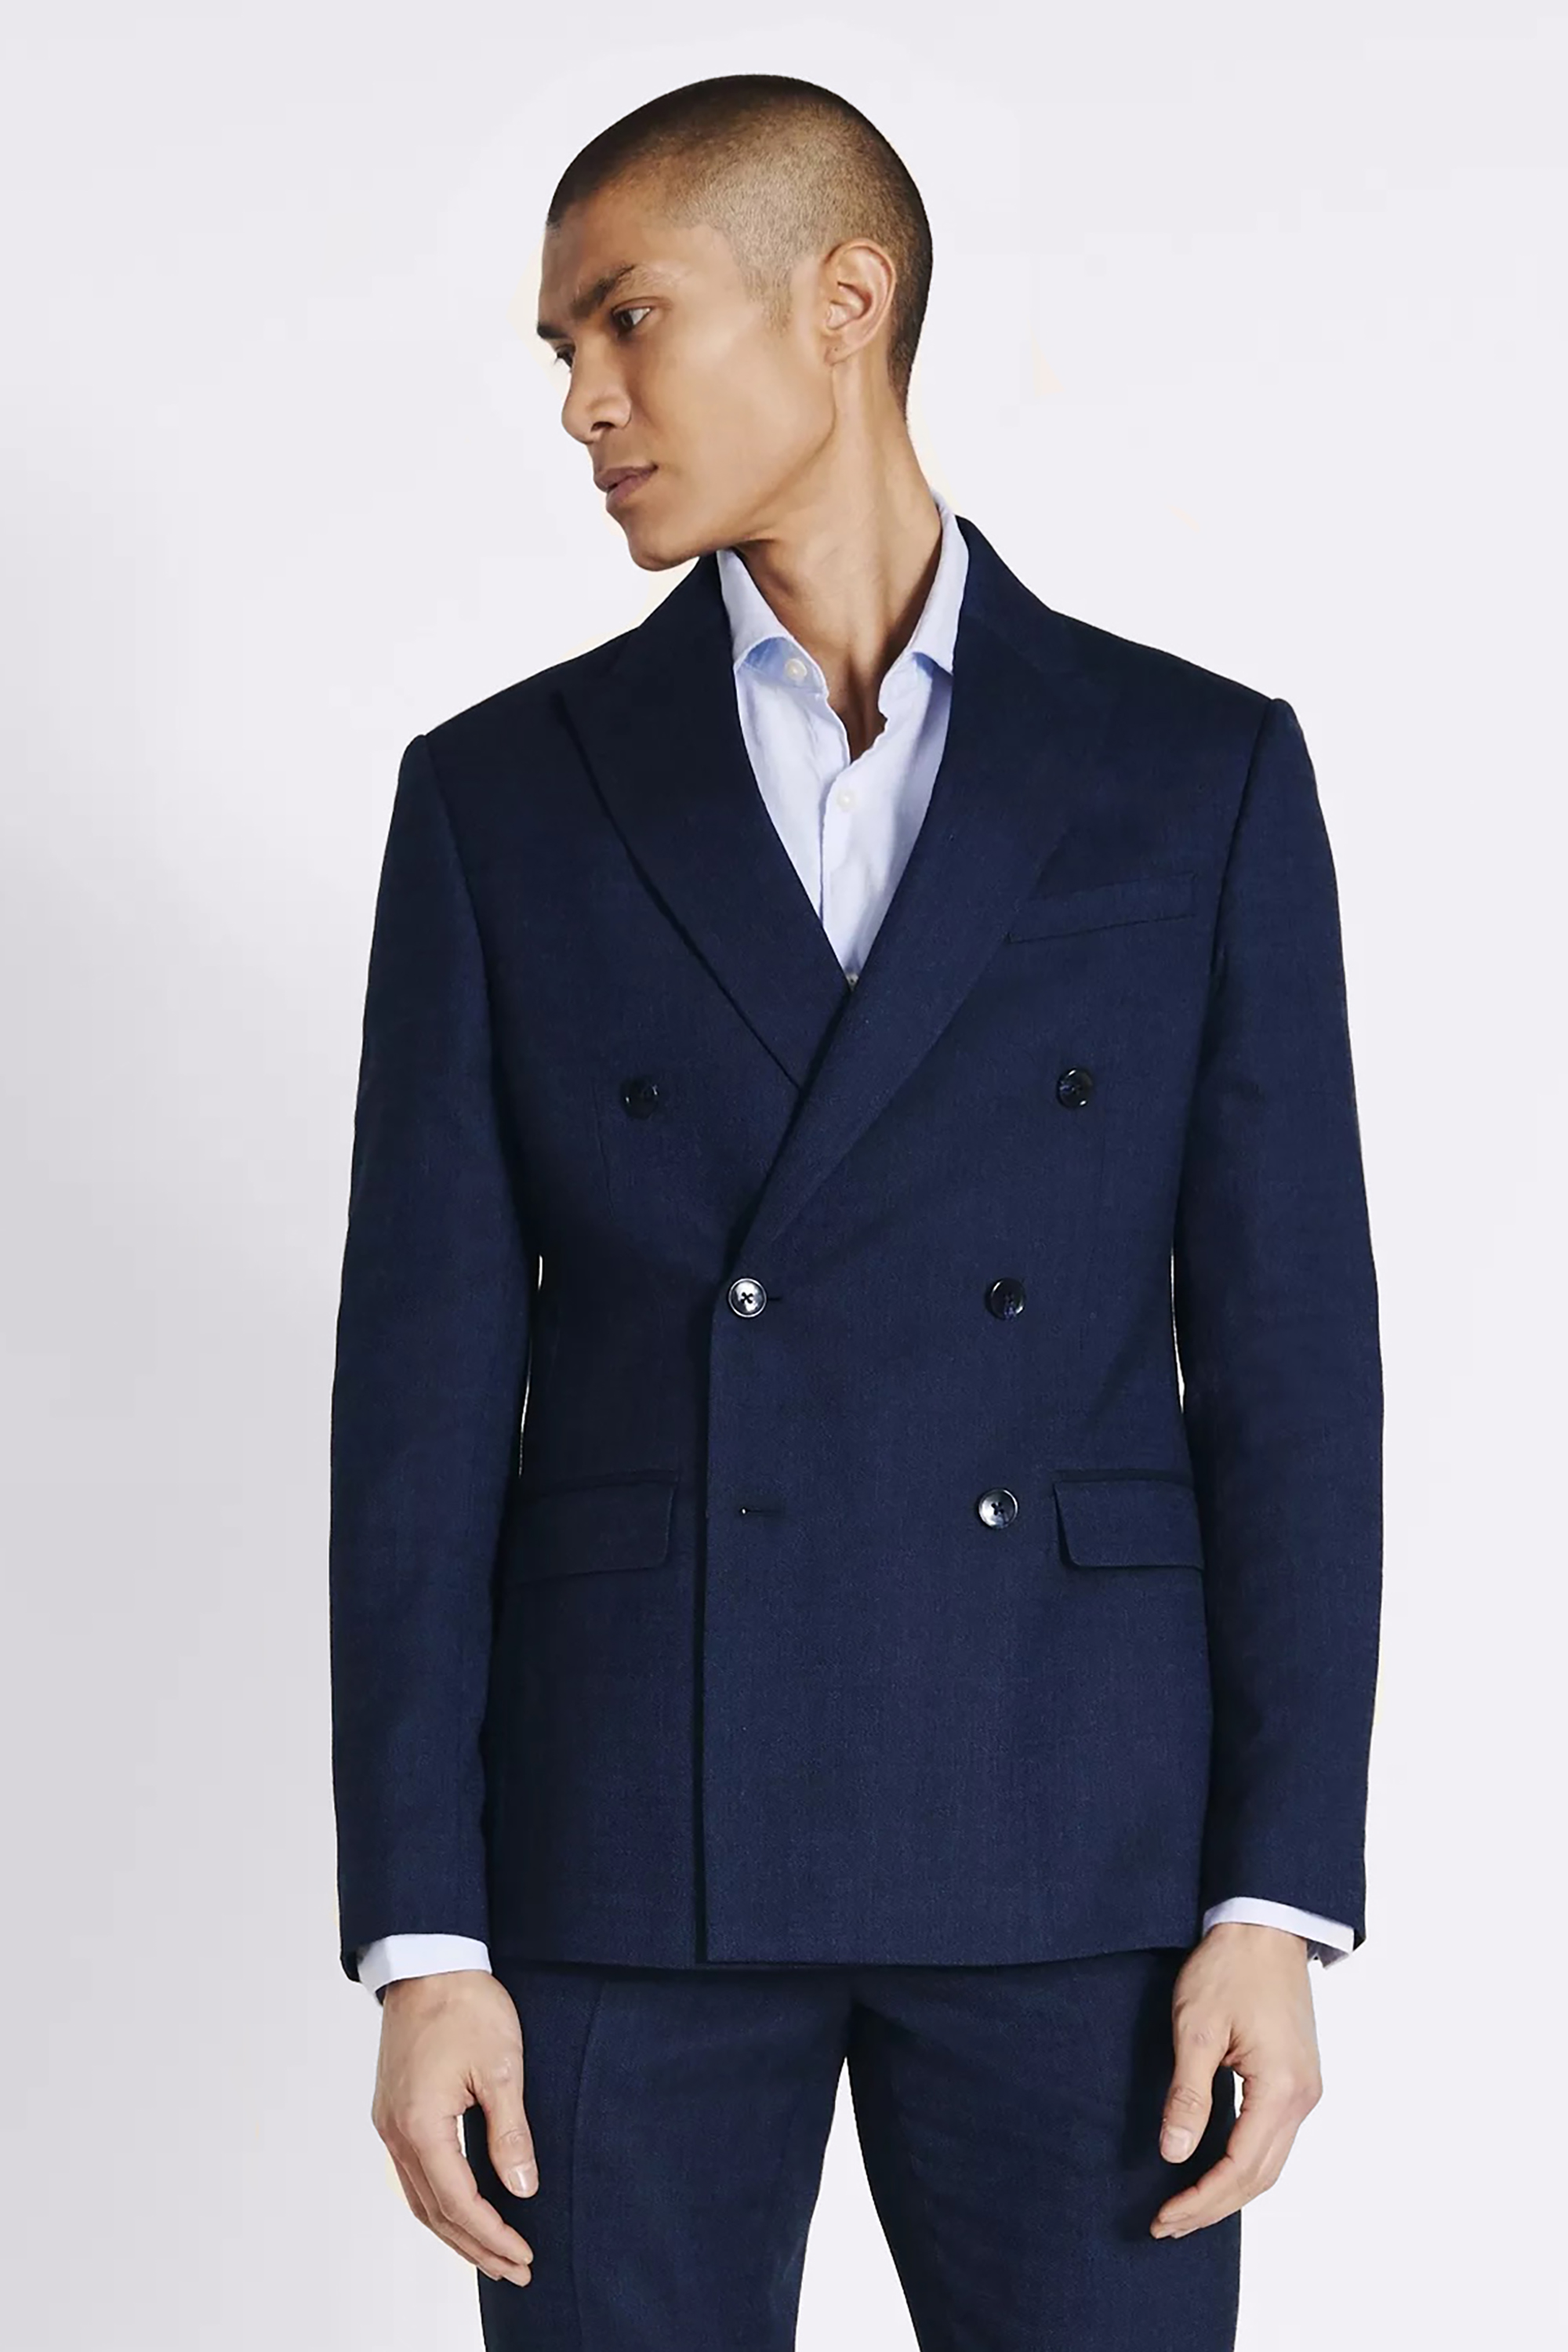 Slim Fit Blue Twisted Jacket | Buy Online at Moss